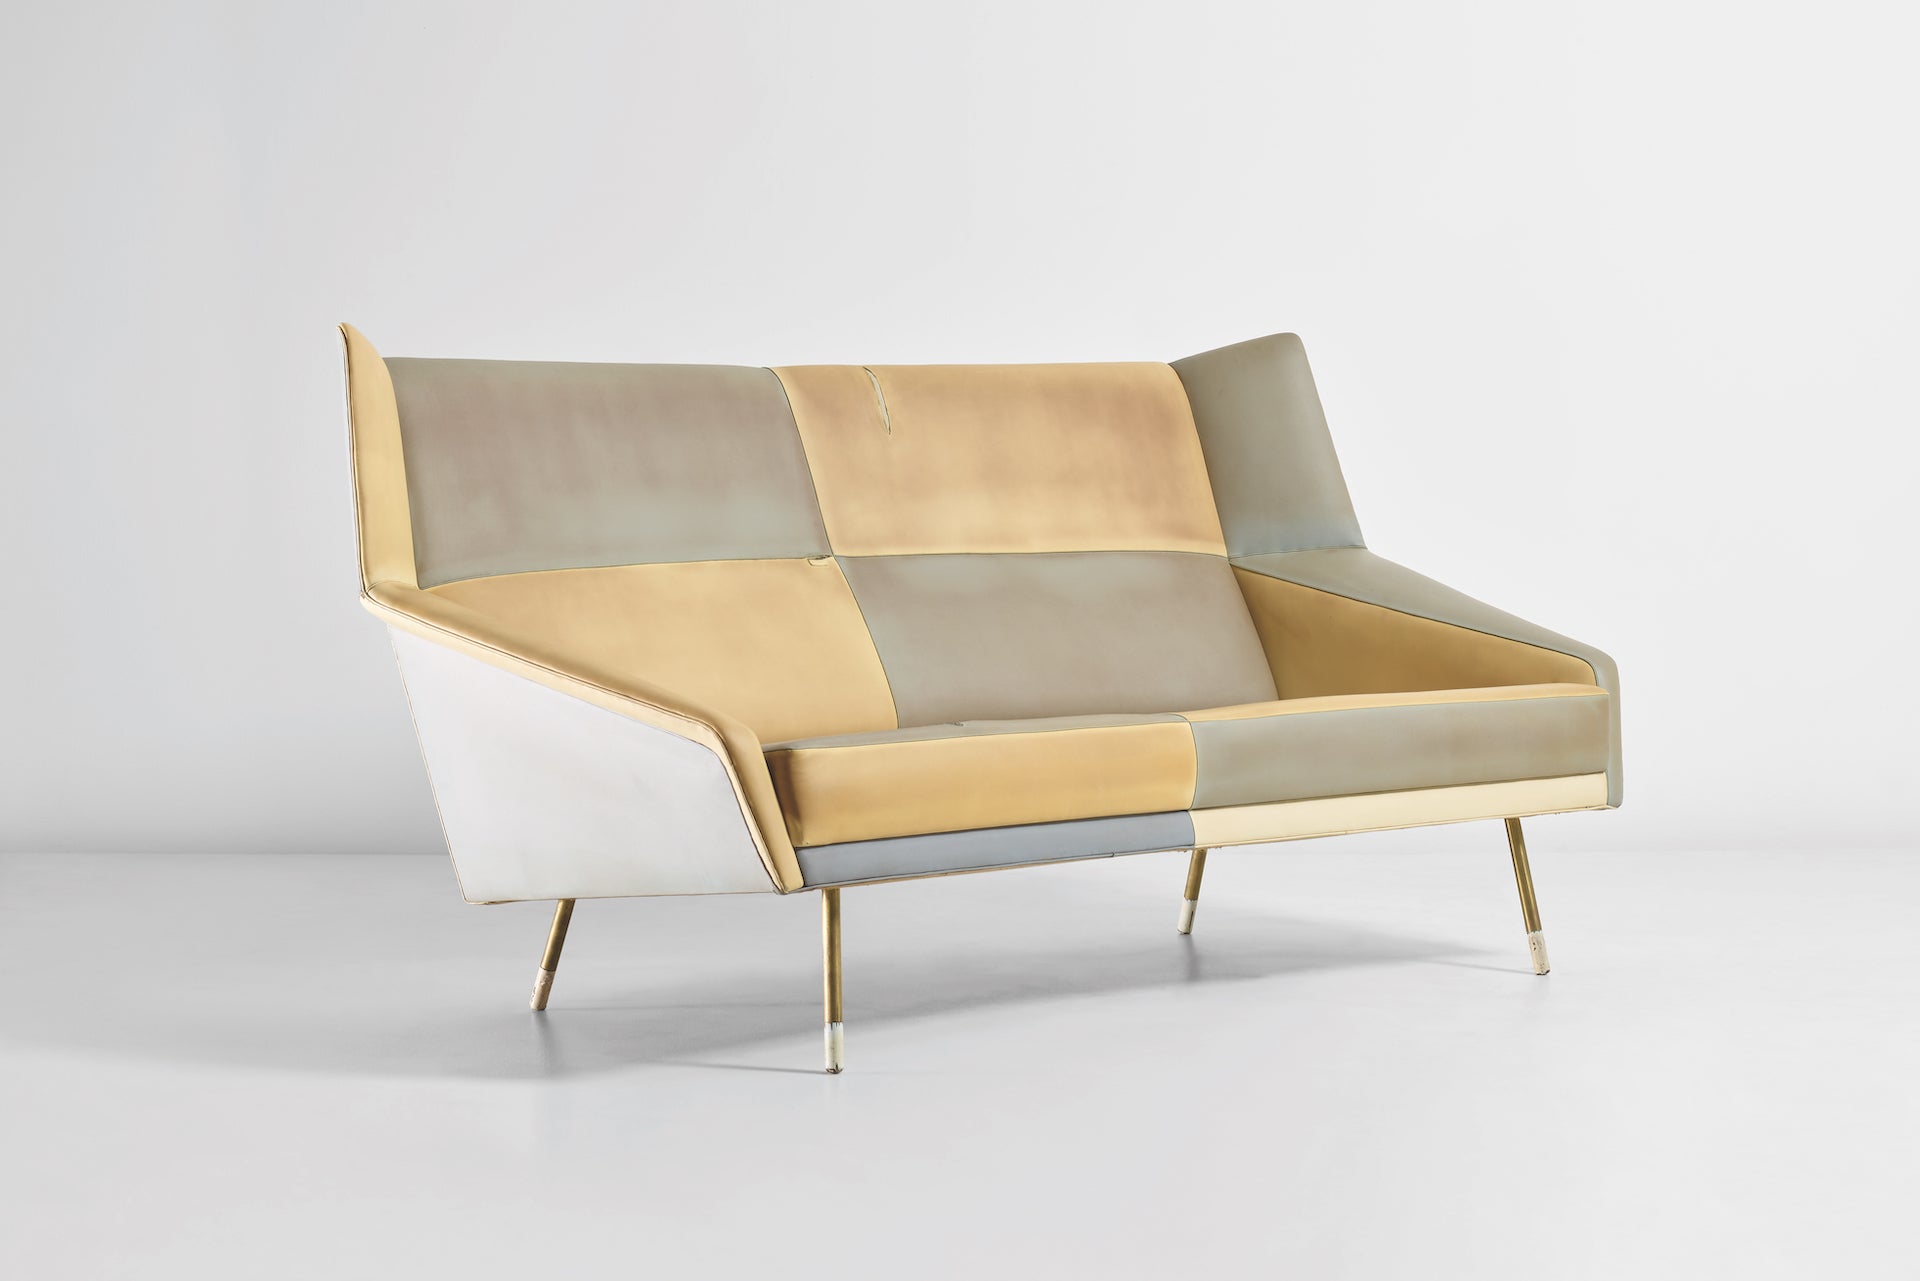 Prototype Mariposa Sofa by Gio Ponti, designed for the XI Milan Triennale, c. 1957. Sold for £252,000 at Phillips London 12 November 2020. Photo © Phillips